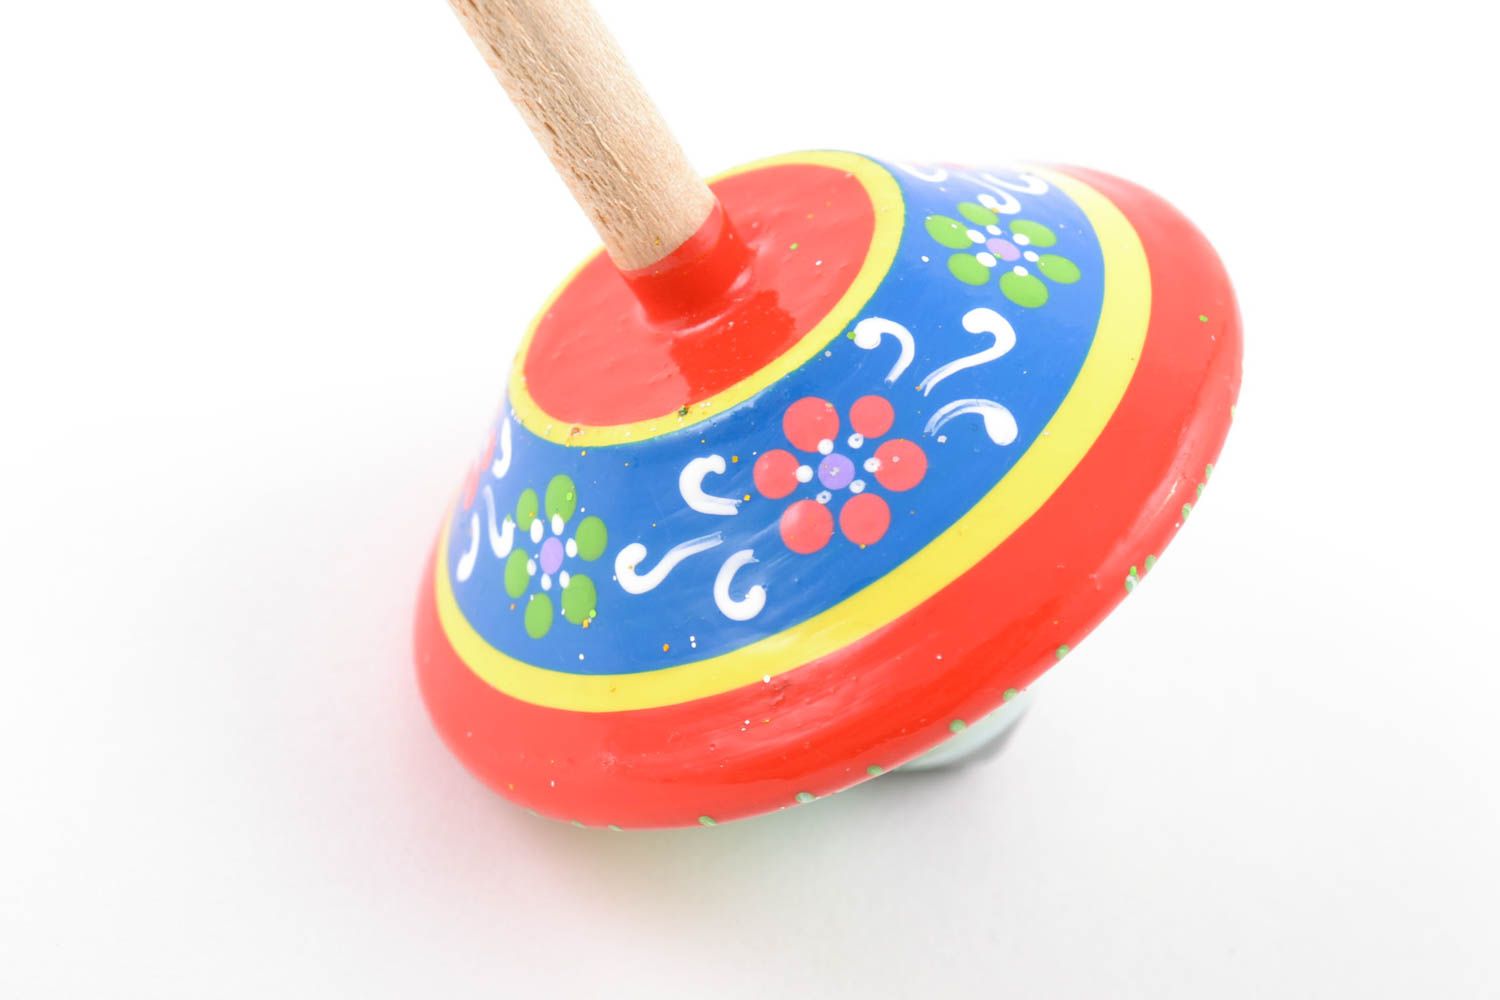 Handmade educational children's toy spinning top painted with eco dyes photo 5